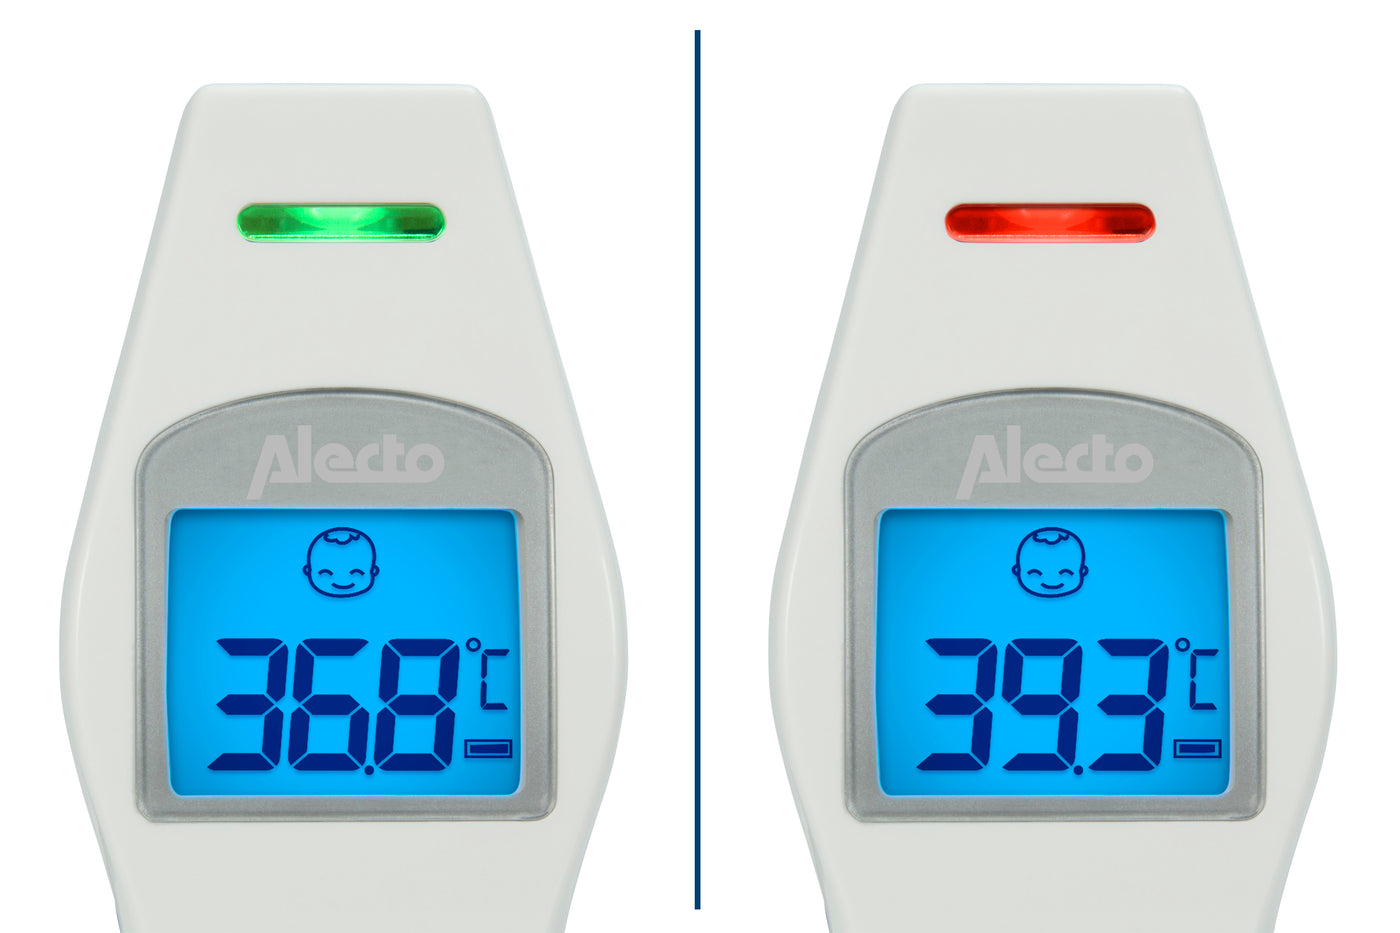 Alecto BC-37 - Thermomètre frontal, infrarouge, blanc